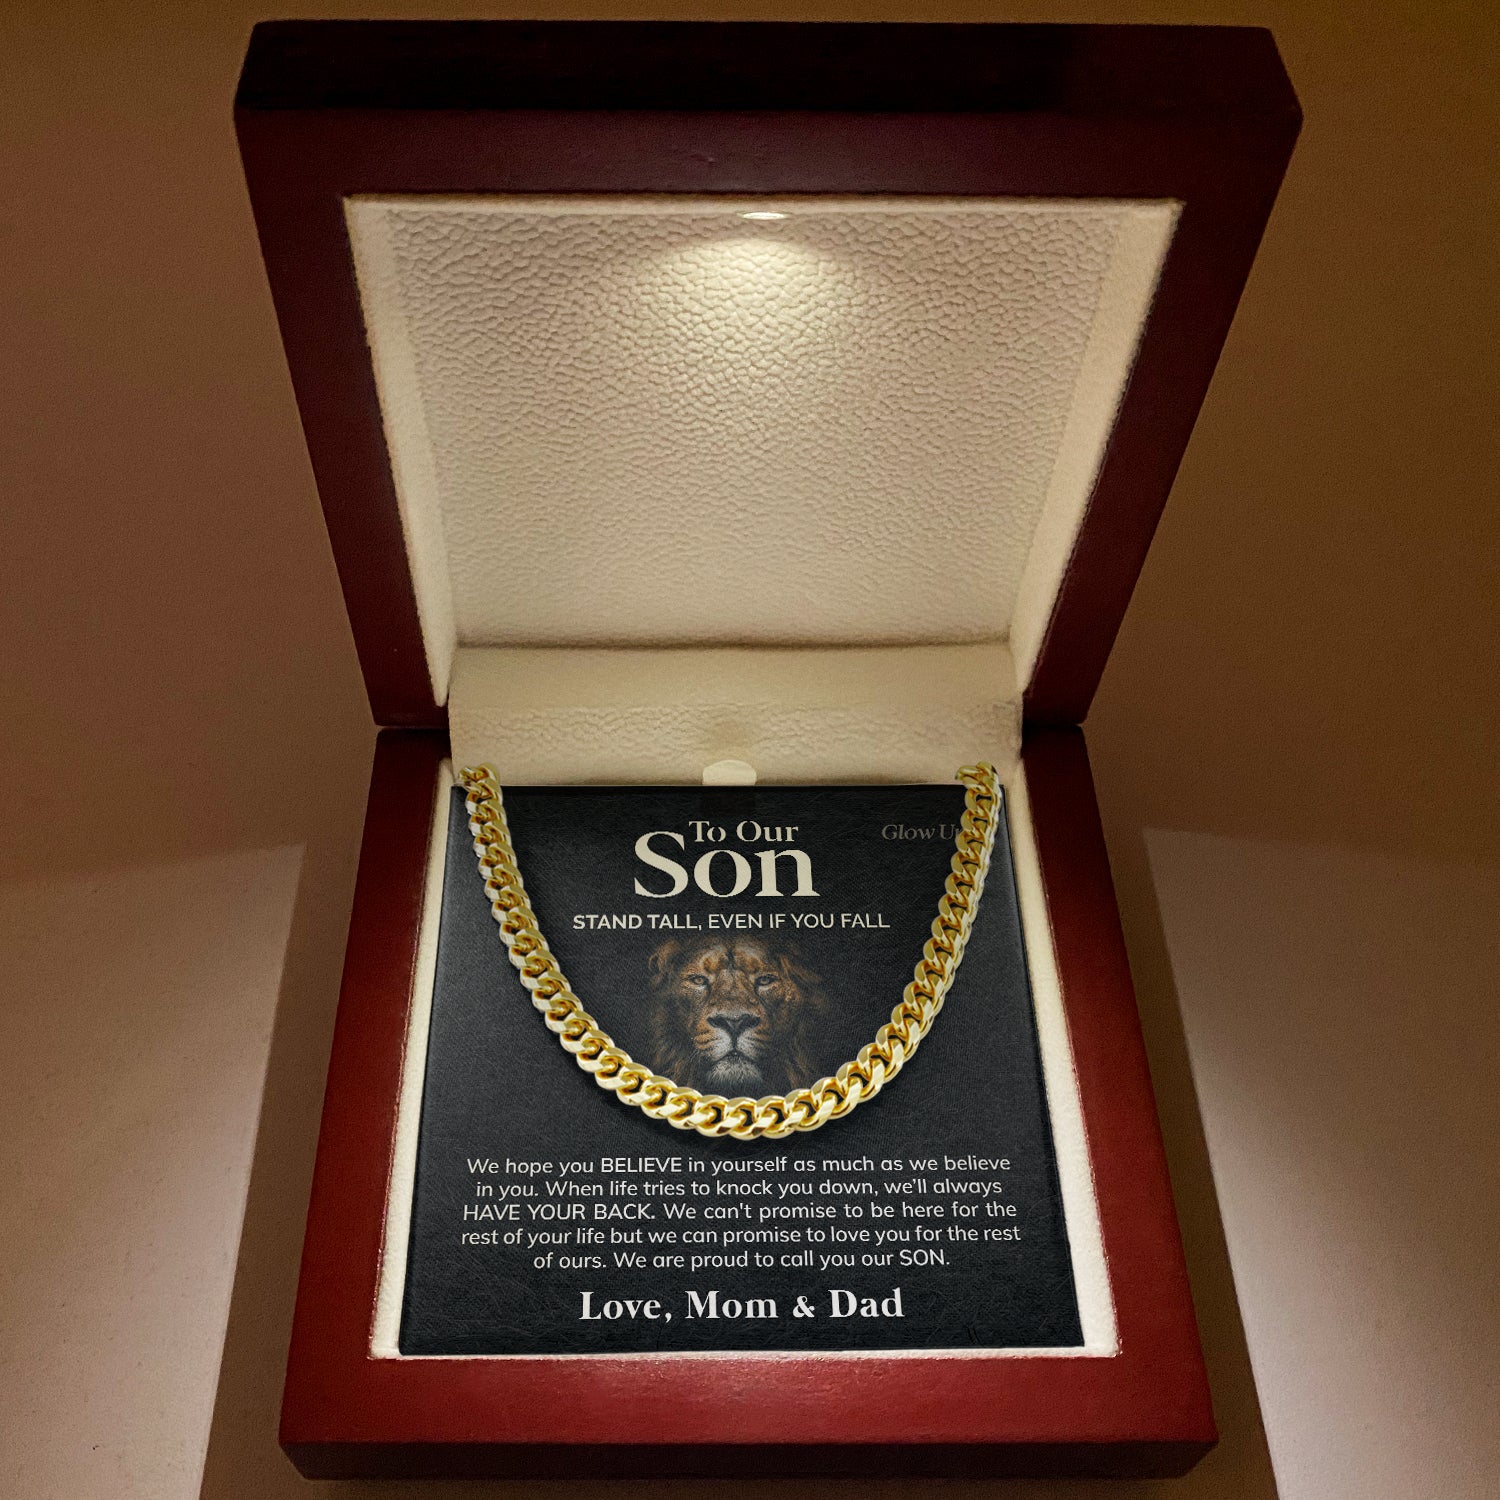 ShineOn Fulfillment Jewelry 14K Yellow Gold Finish / Luxury LED Box To Our Son - We believe in you - Cuban Link Chain